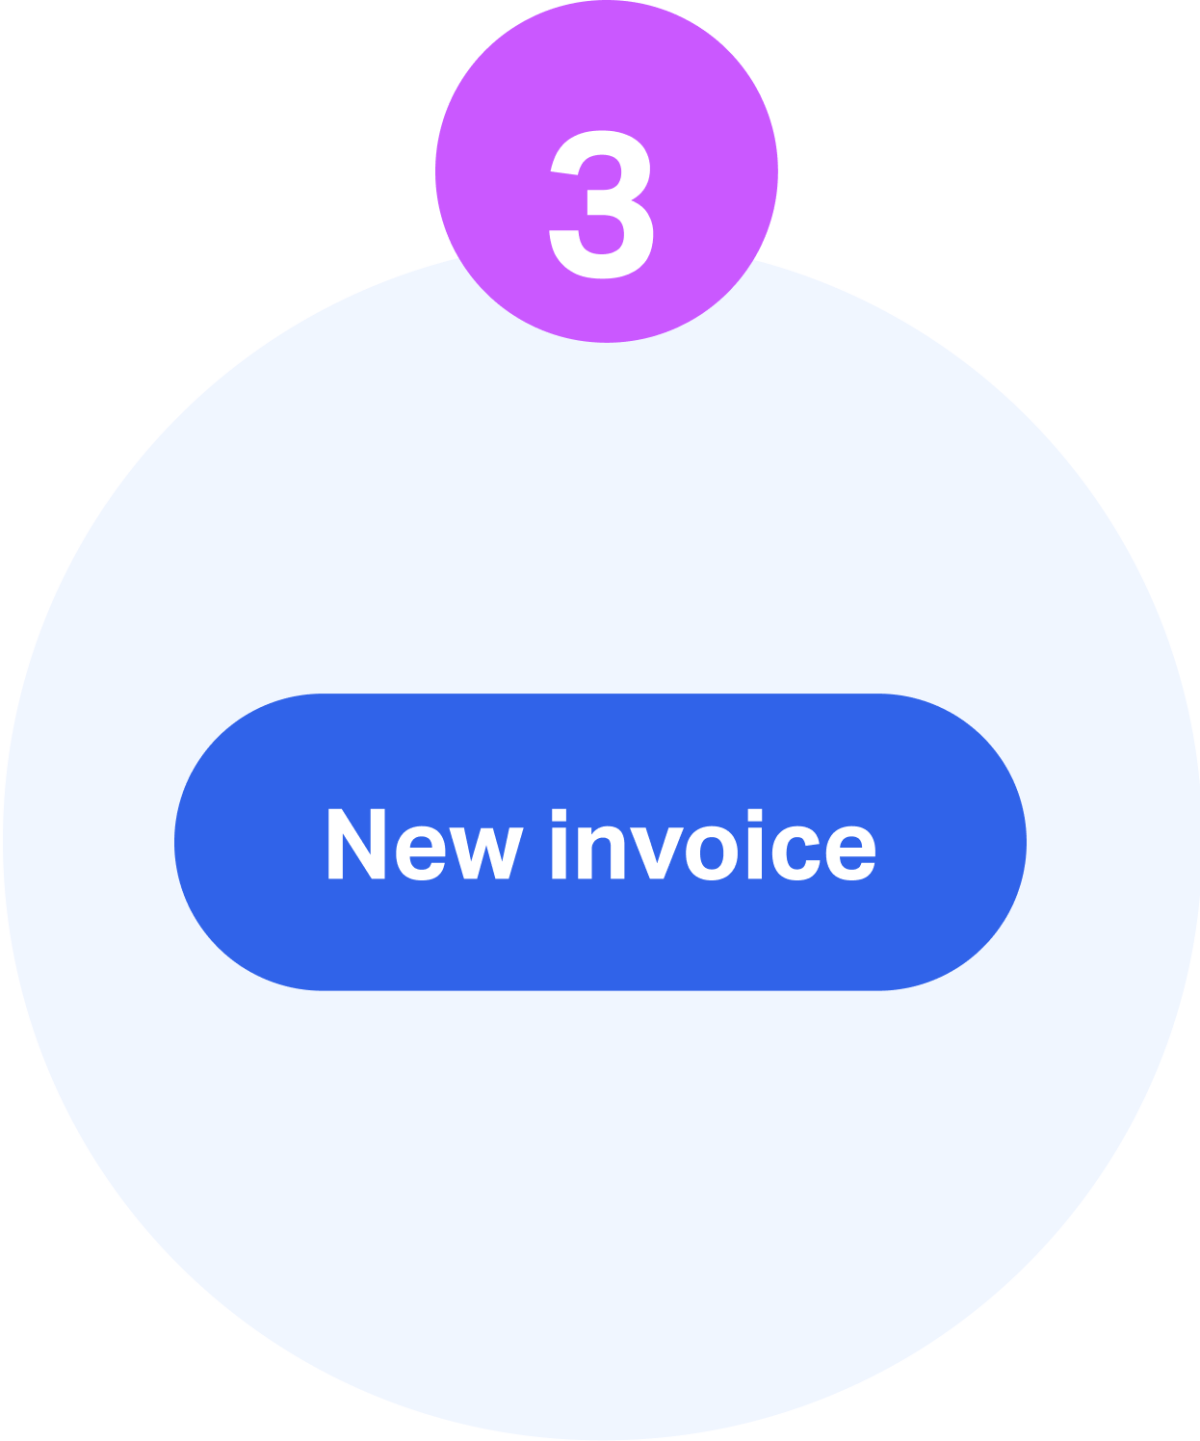 Image showing "new invoice" button